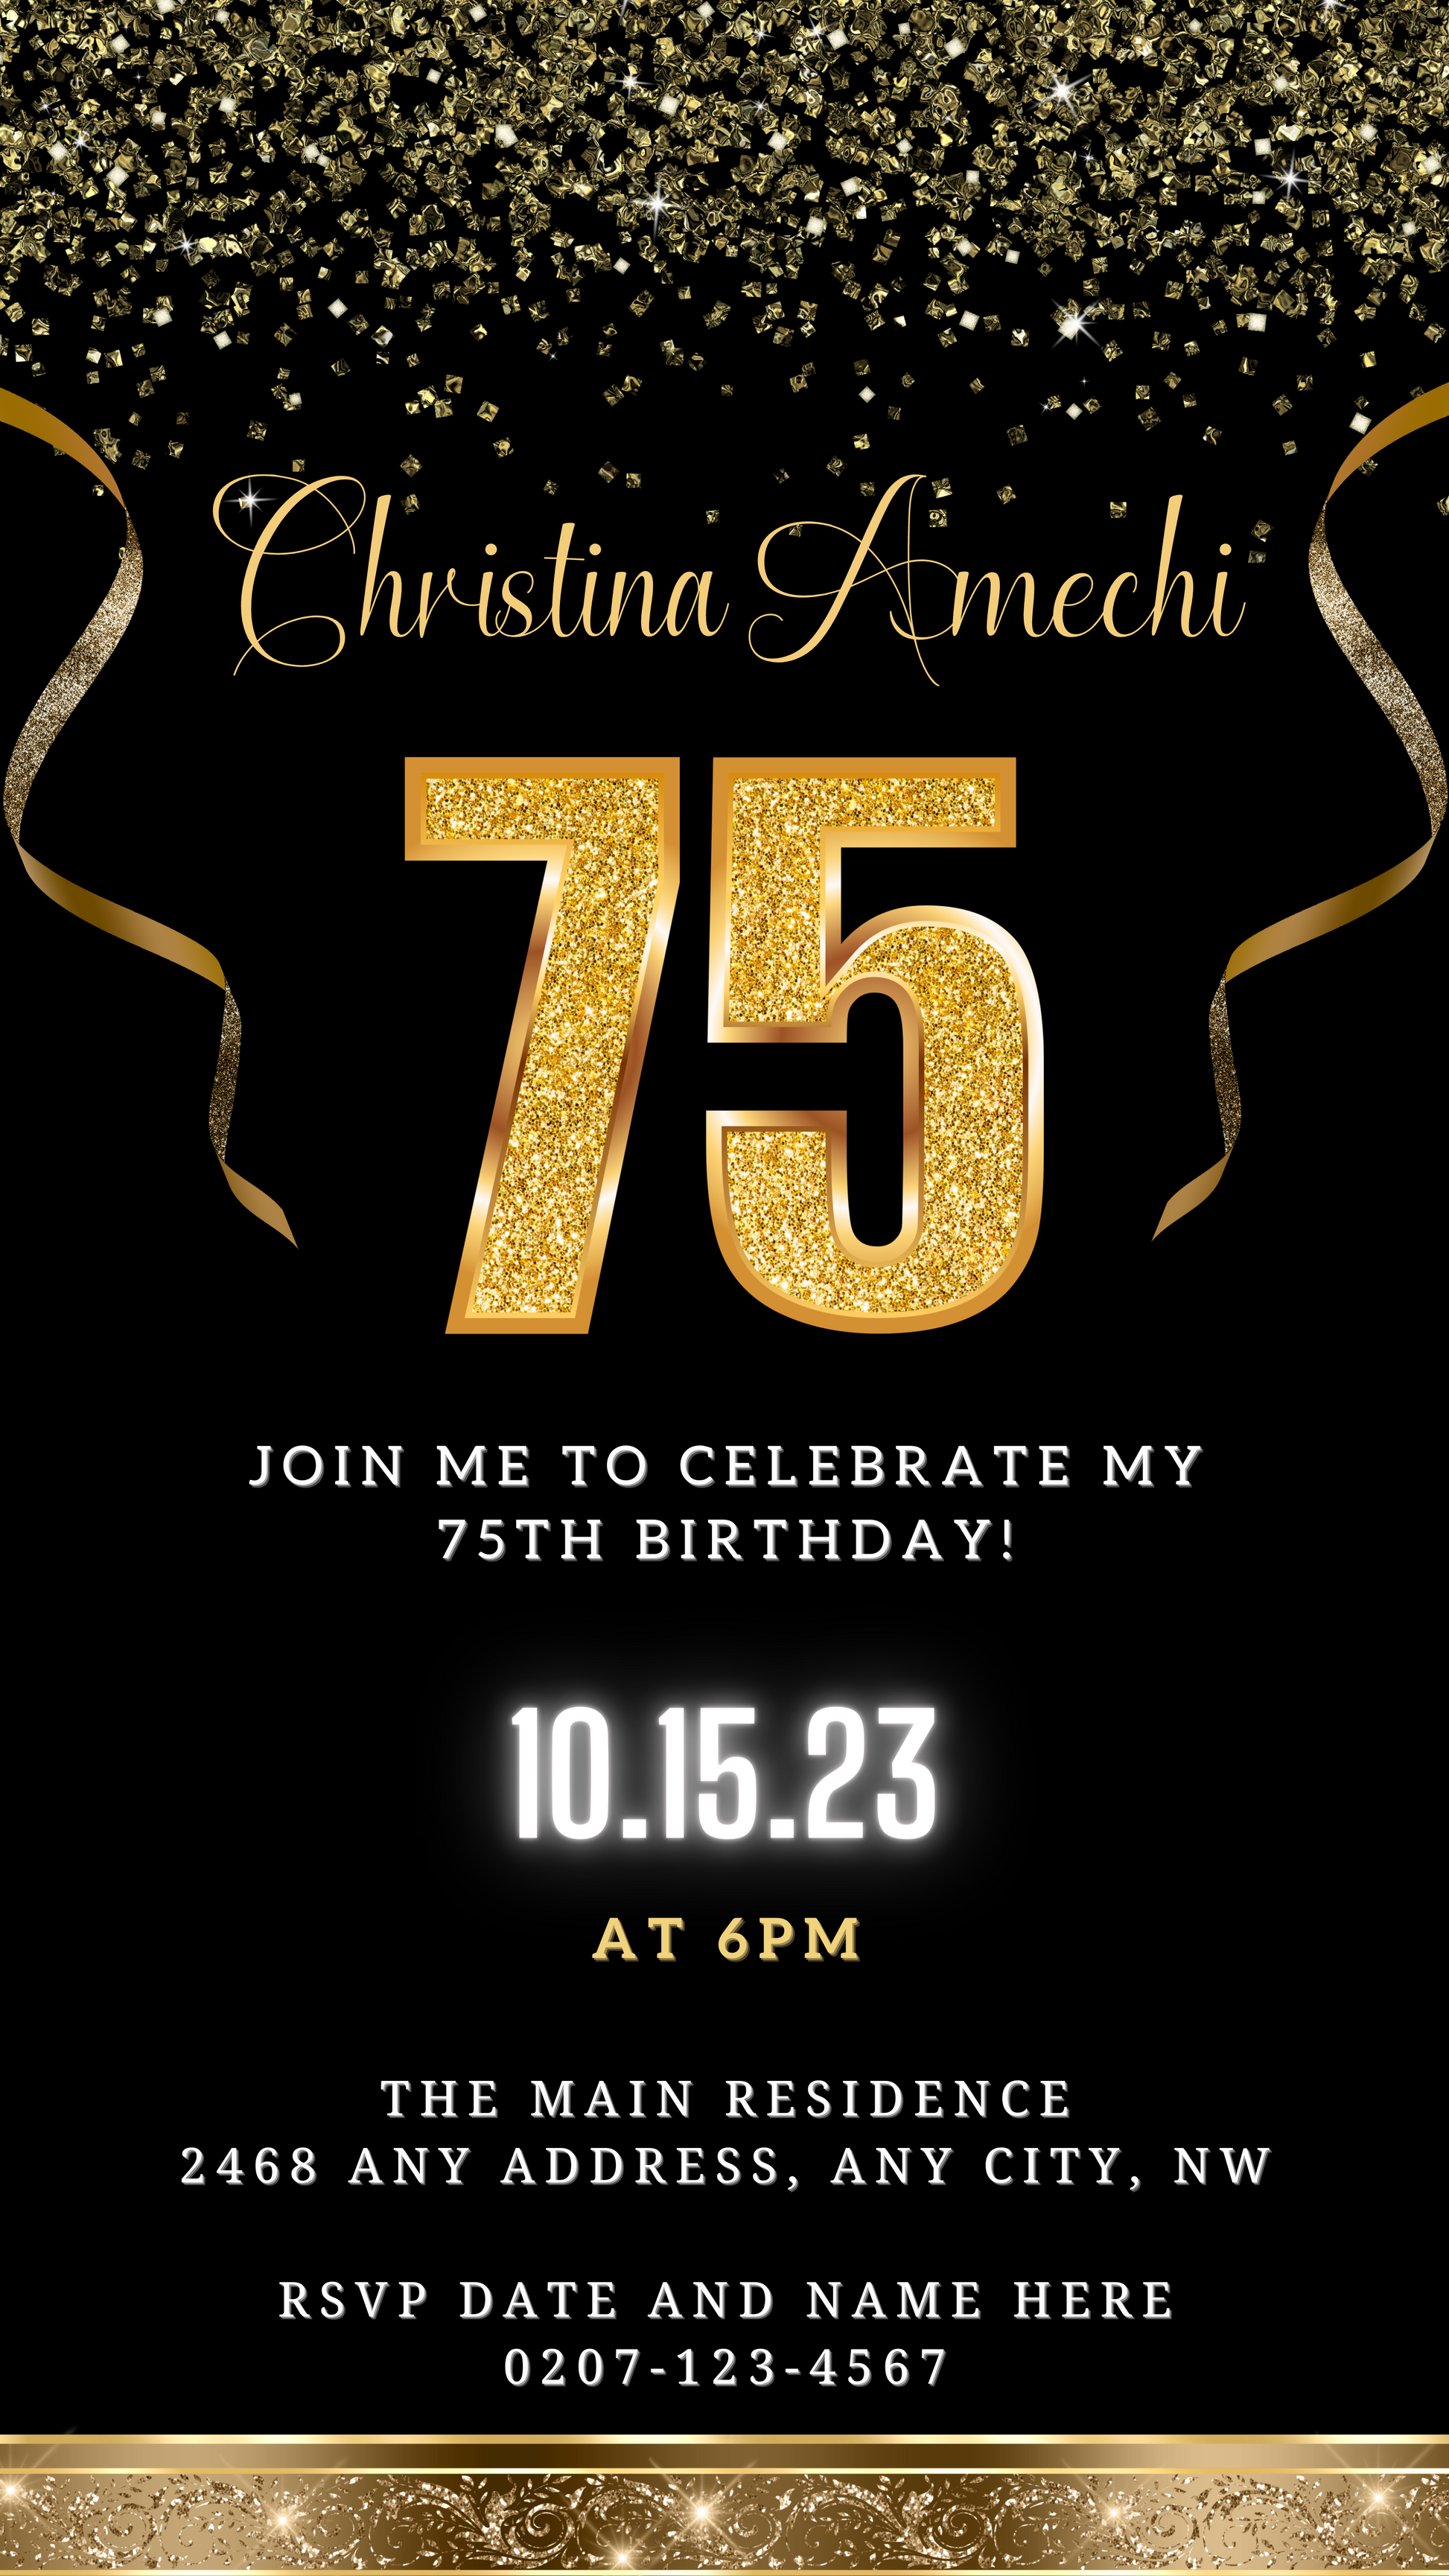 Black Gold Confetti | 75th Birthday Evite featuring customizable gold text and ribbons on a black background, designed for easy personalization via Canva for smartphone sharing.